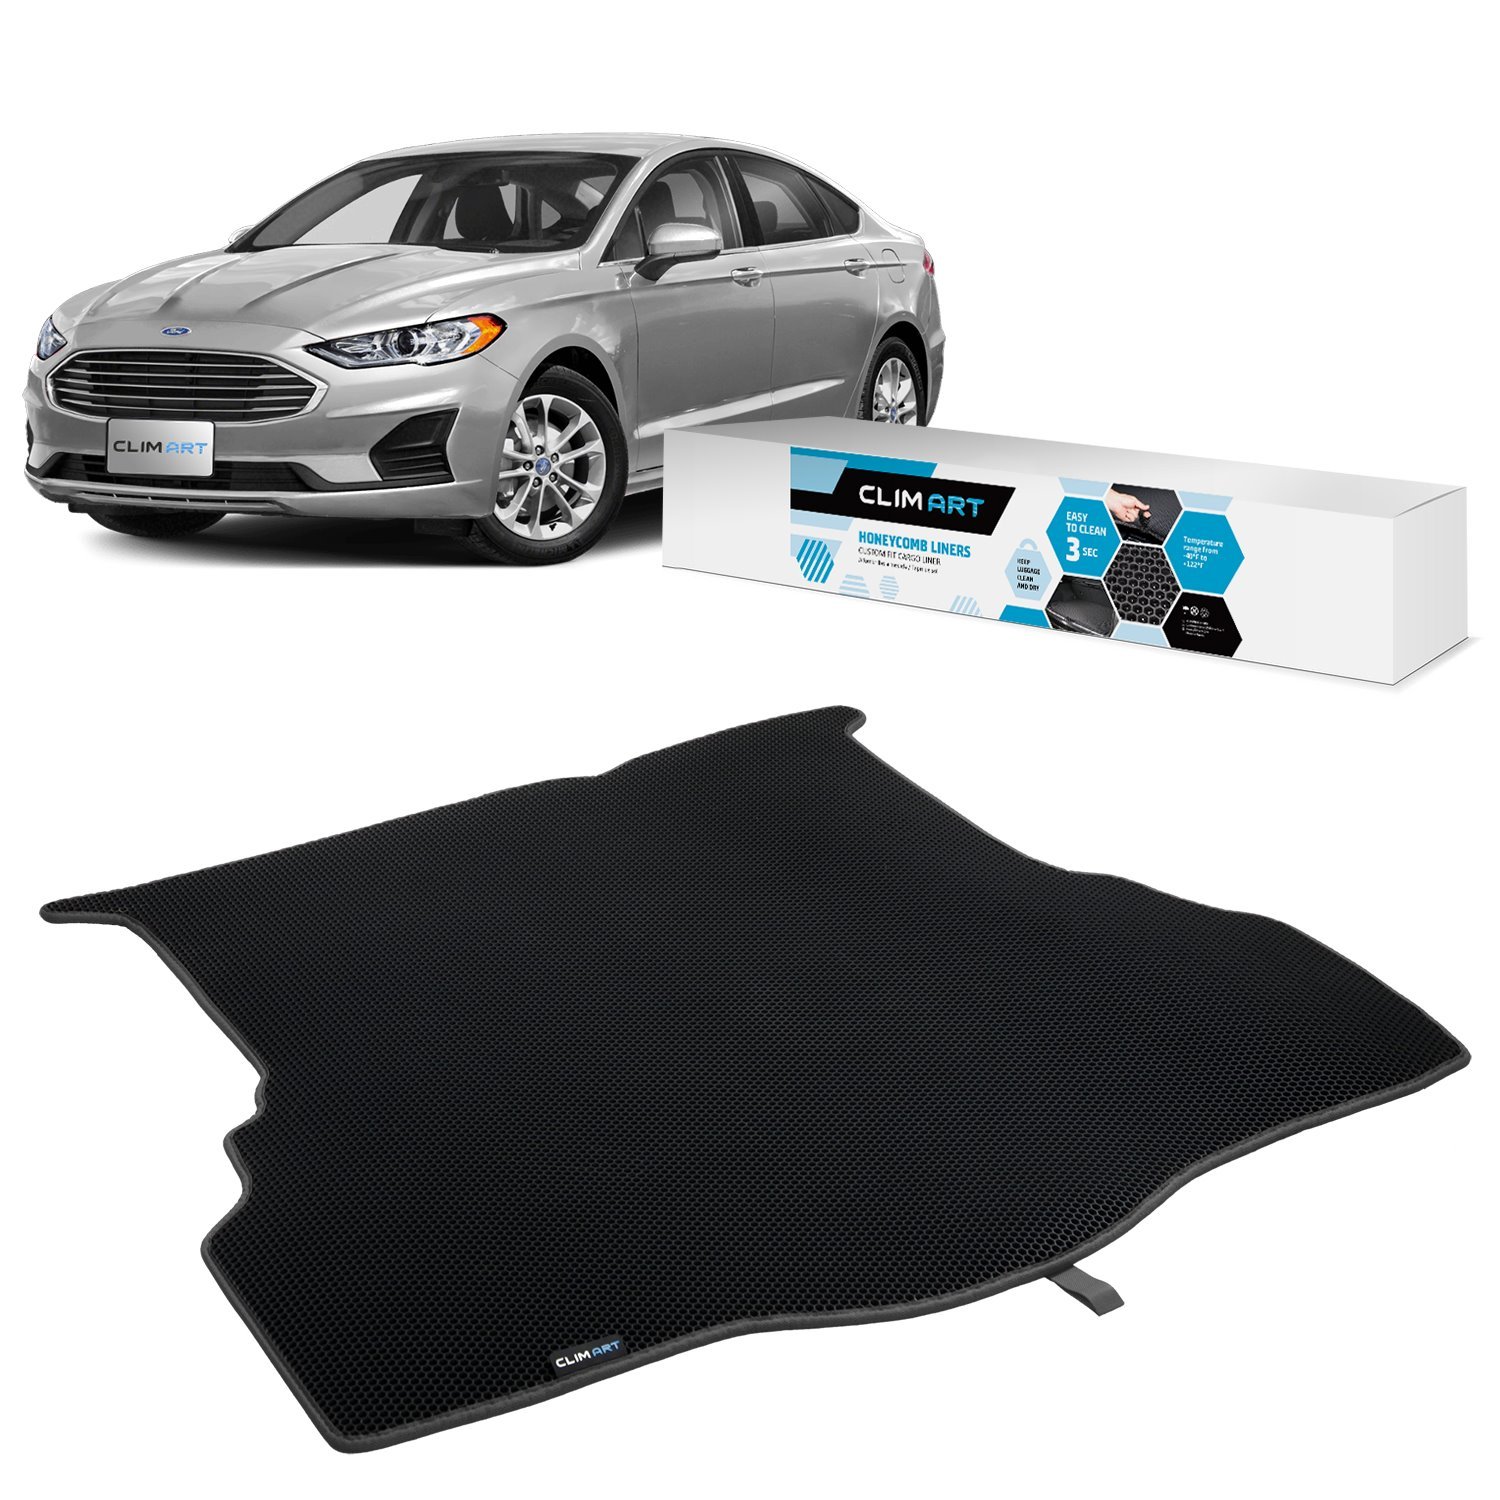 CLIM ART Honeycomb Custom Fit Cargo Liner for 2013-2022 Ford Fusion